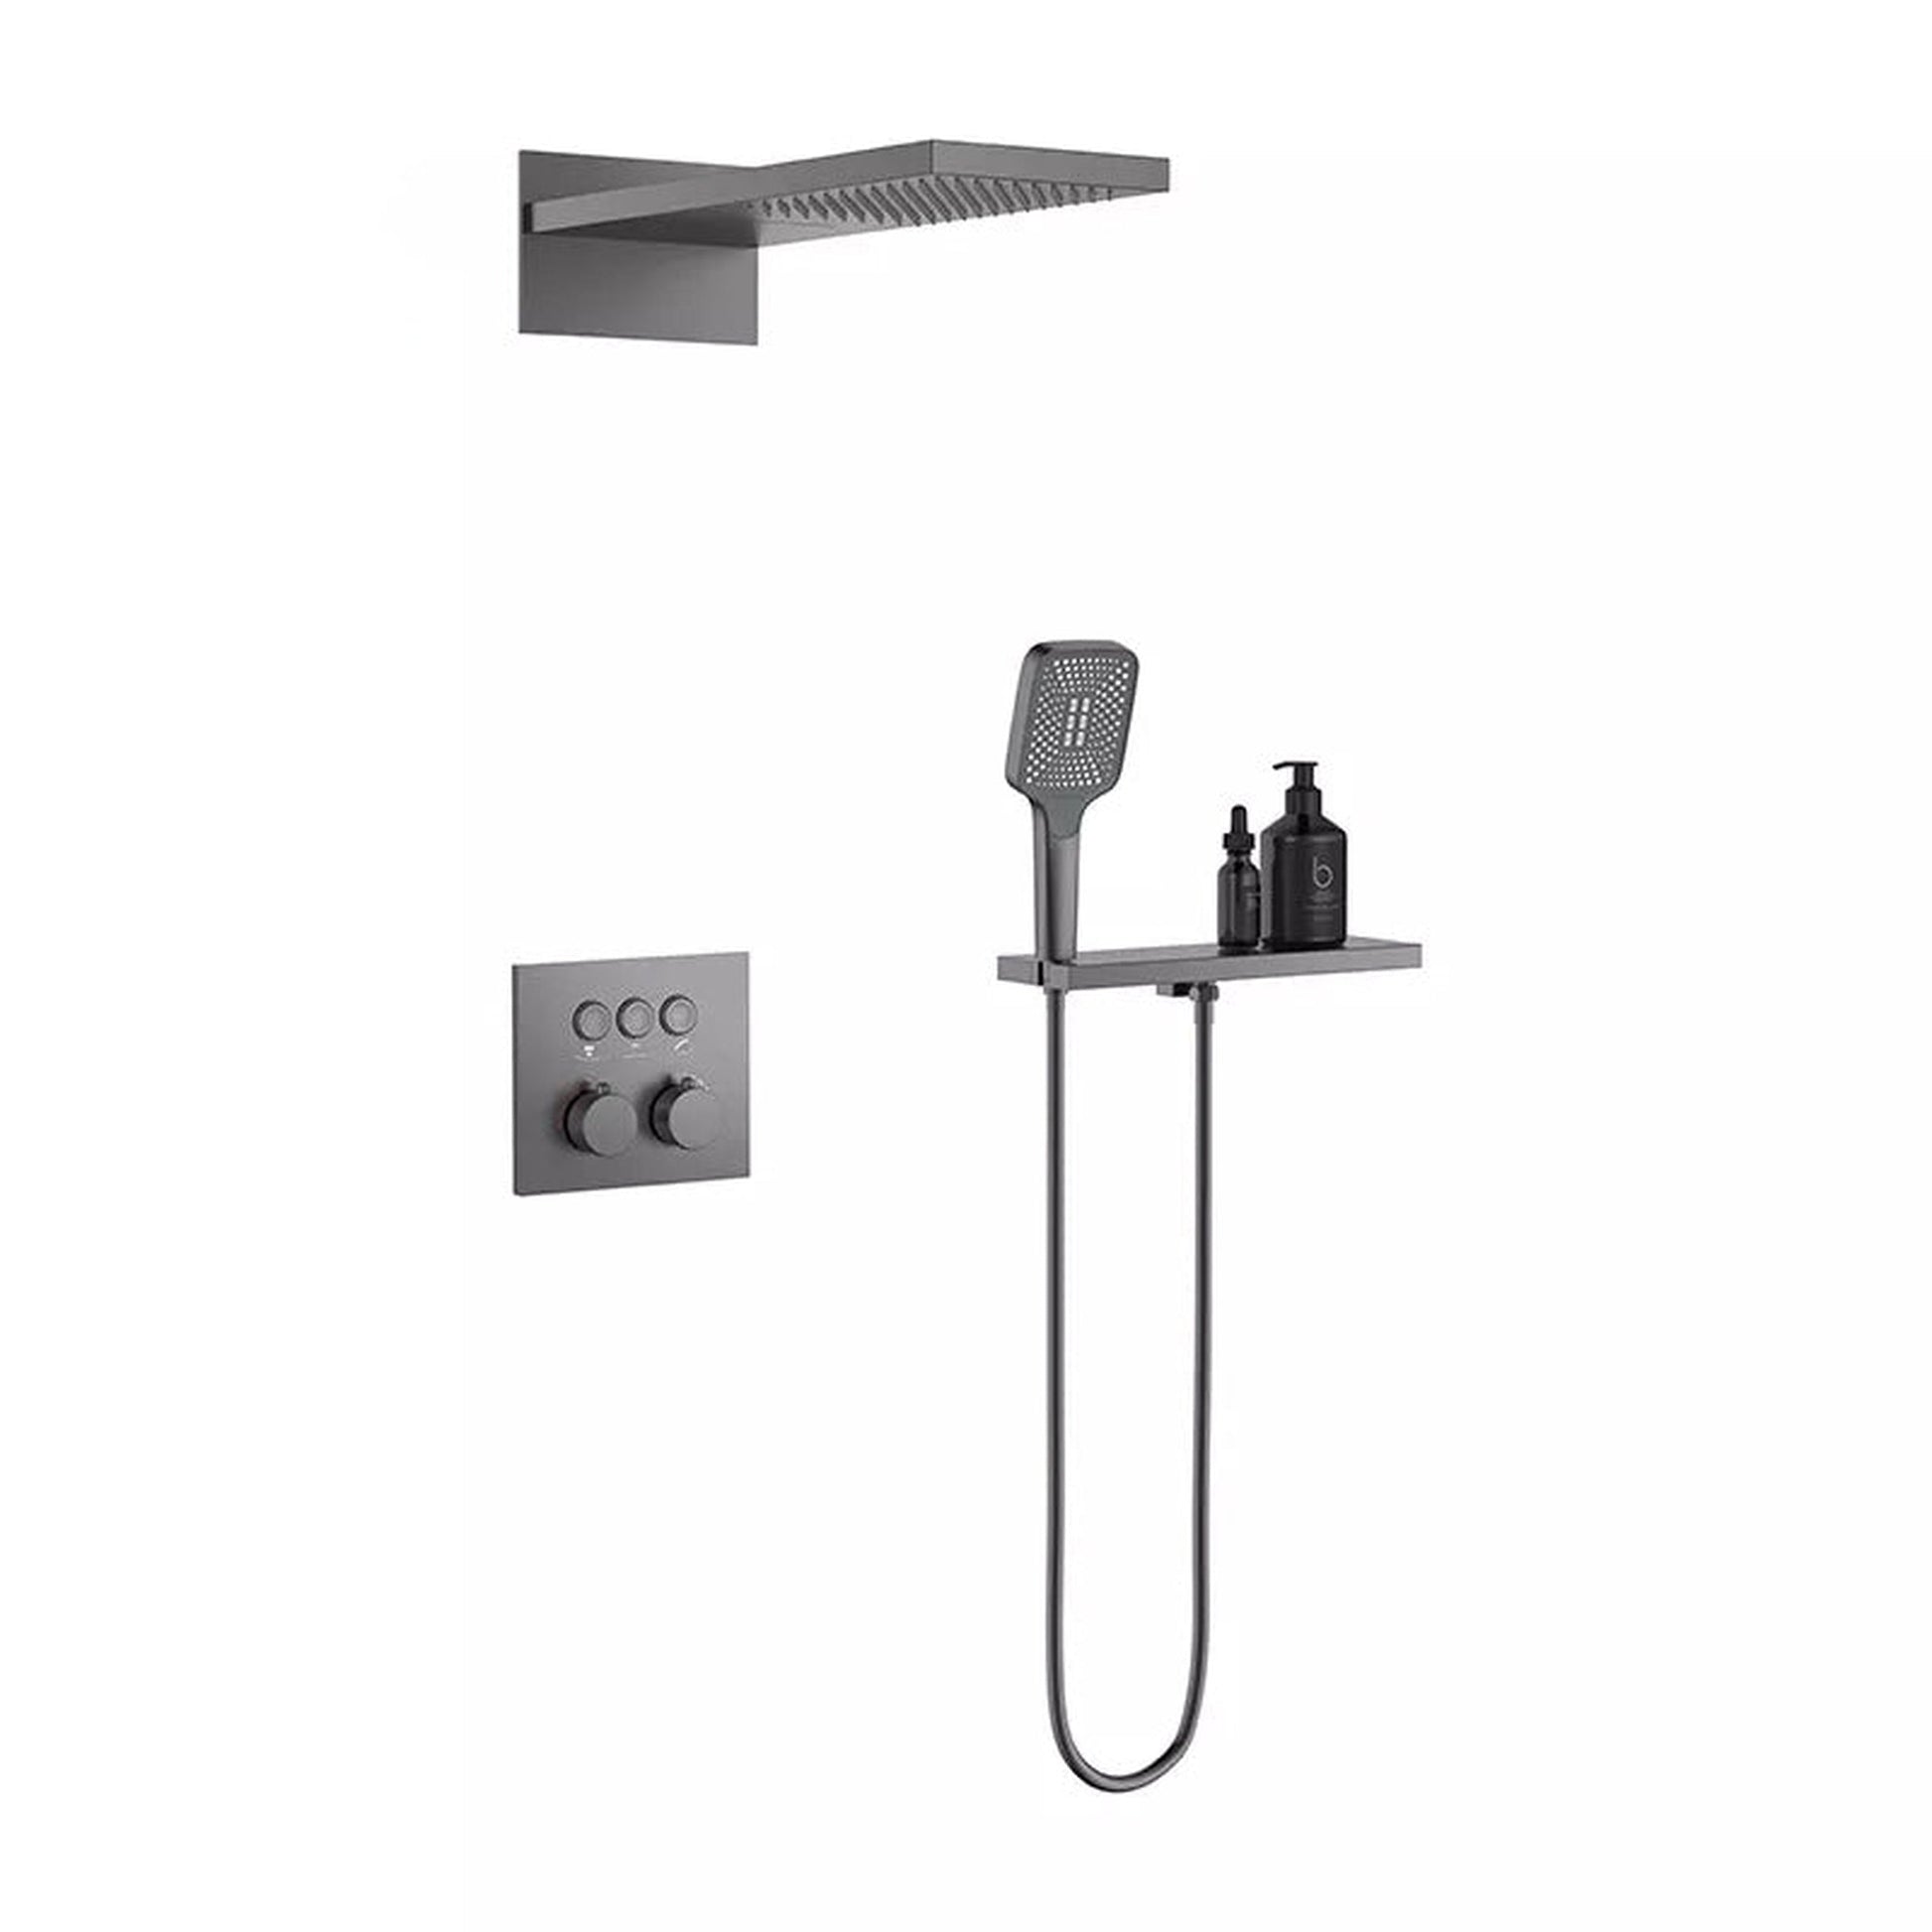 Fontana Trieste Creative Luxury Matte Black Wall-Mounted Thermostatic Rainfall Waterfall Shower System With Hand Shower